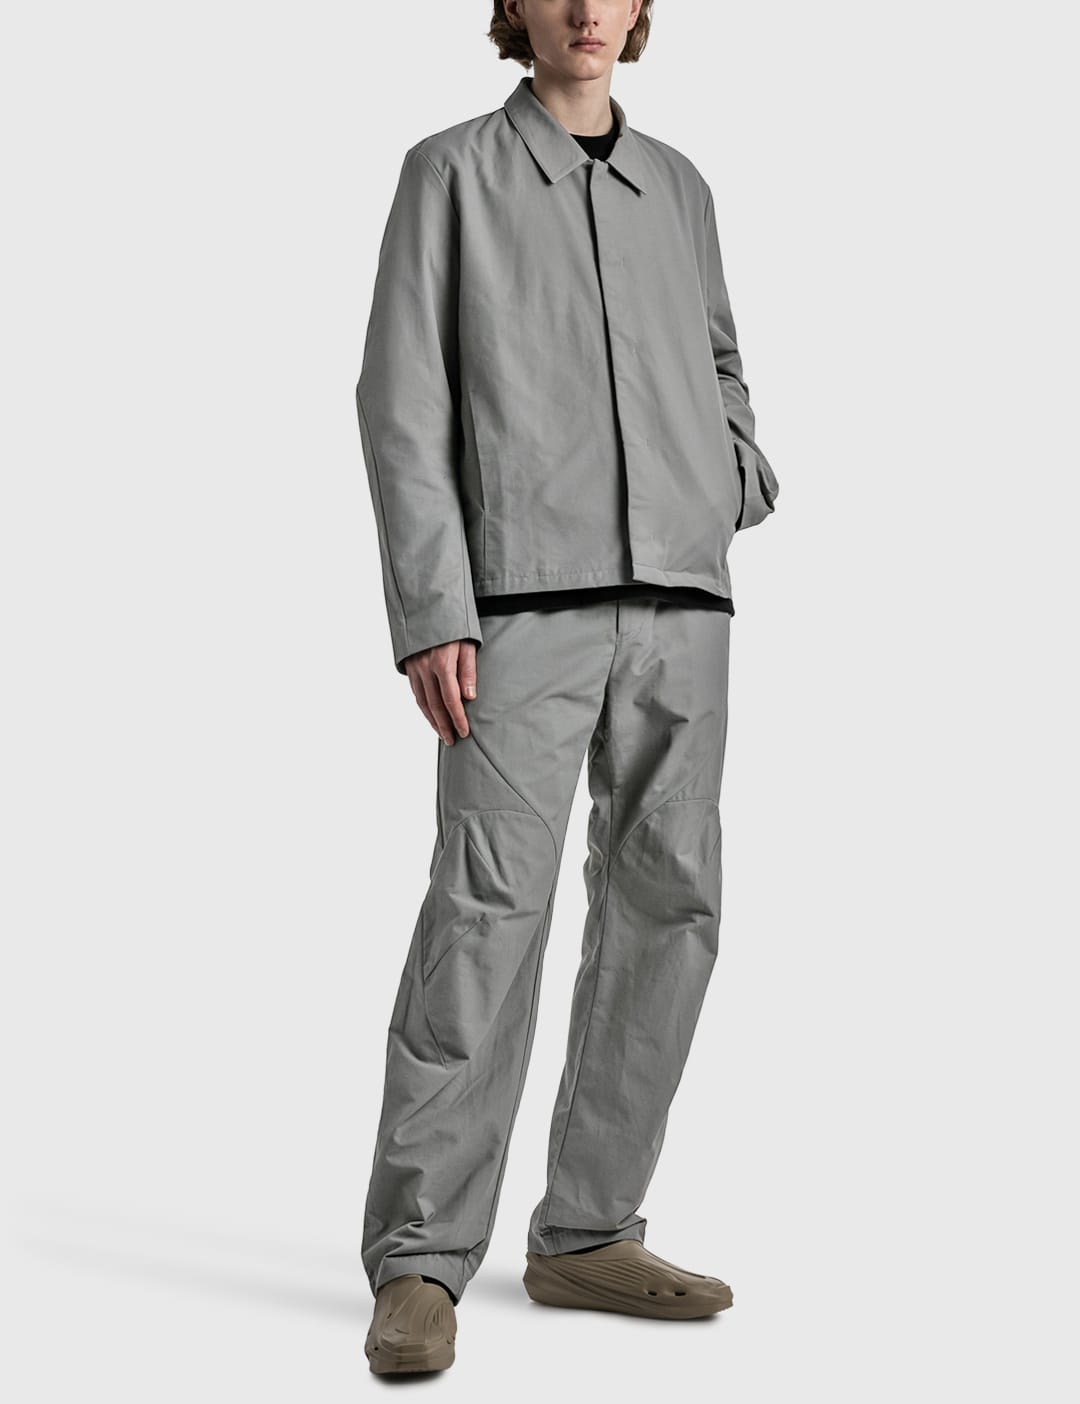 POST ARCHIVE FACTION (PAF) - 5.0 JACKET RIGHT | HBX - Globally